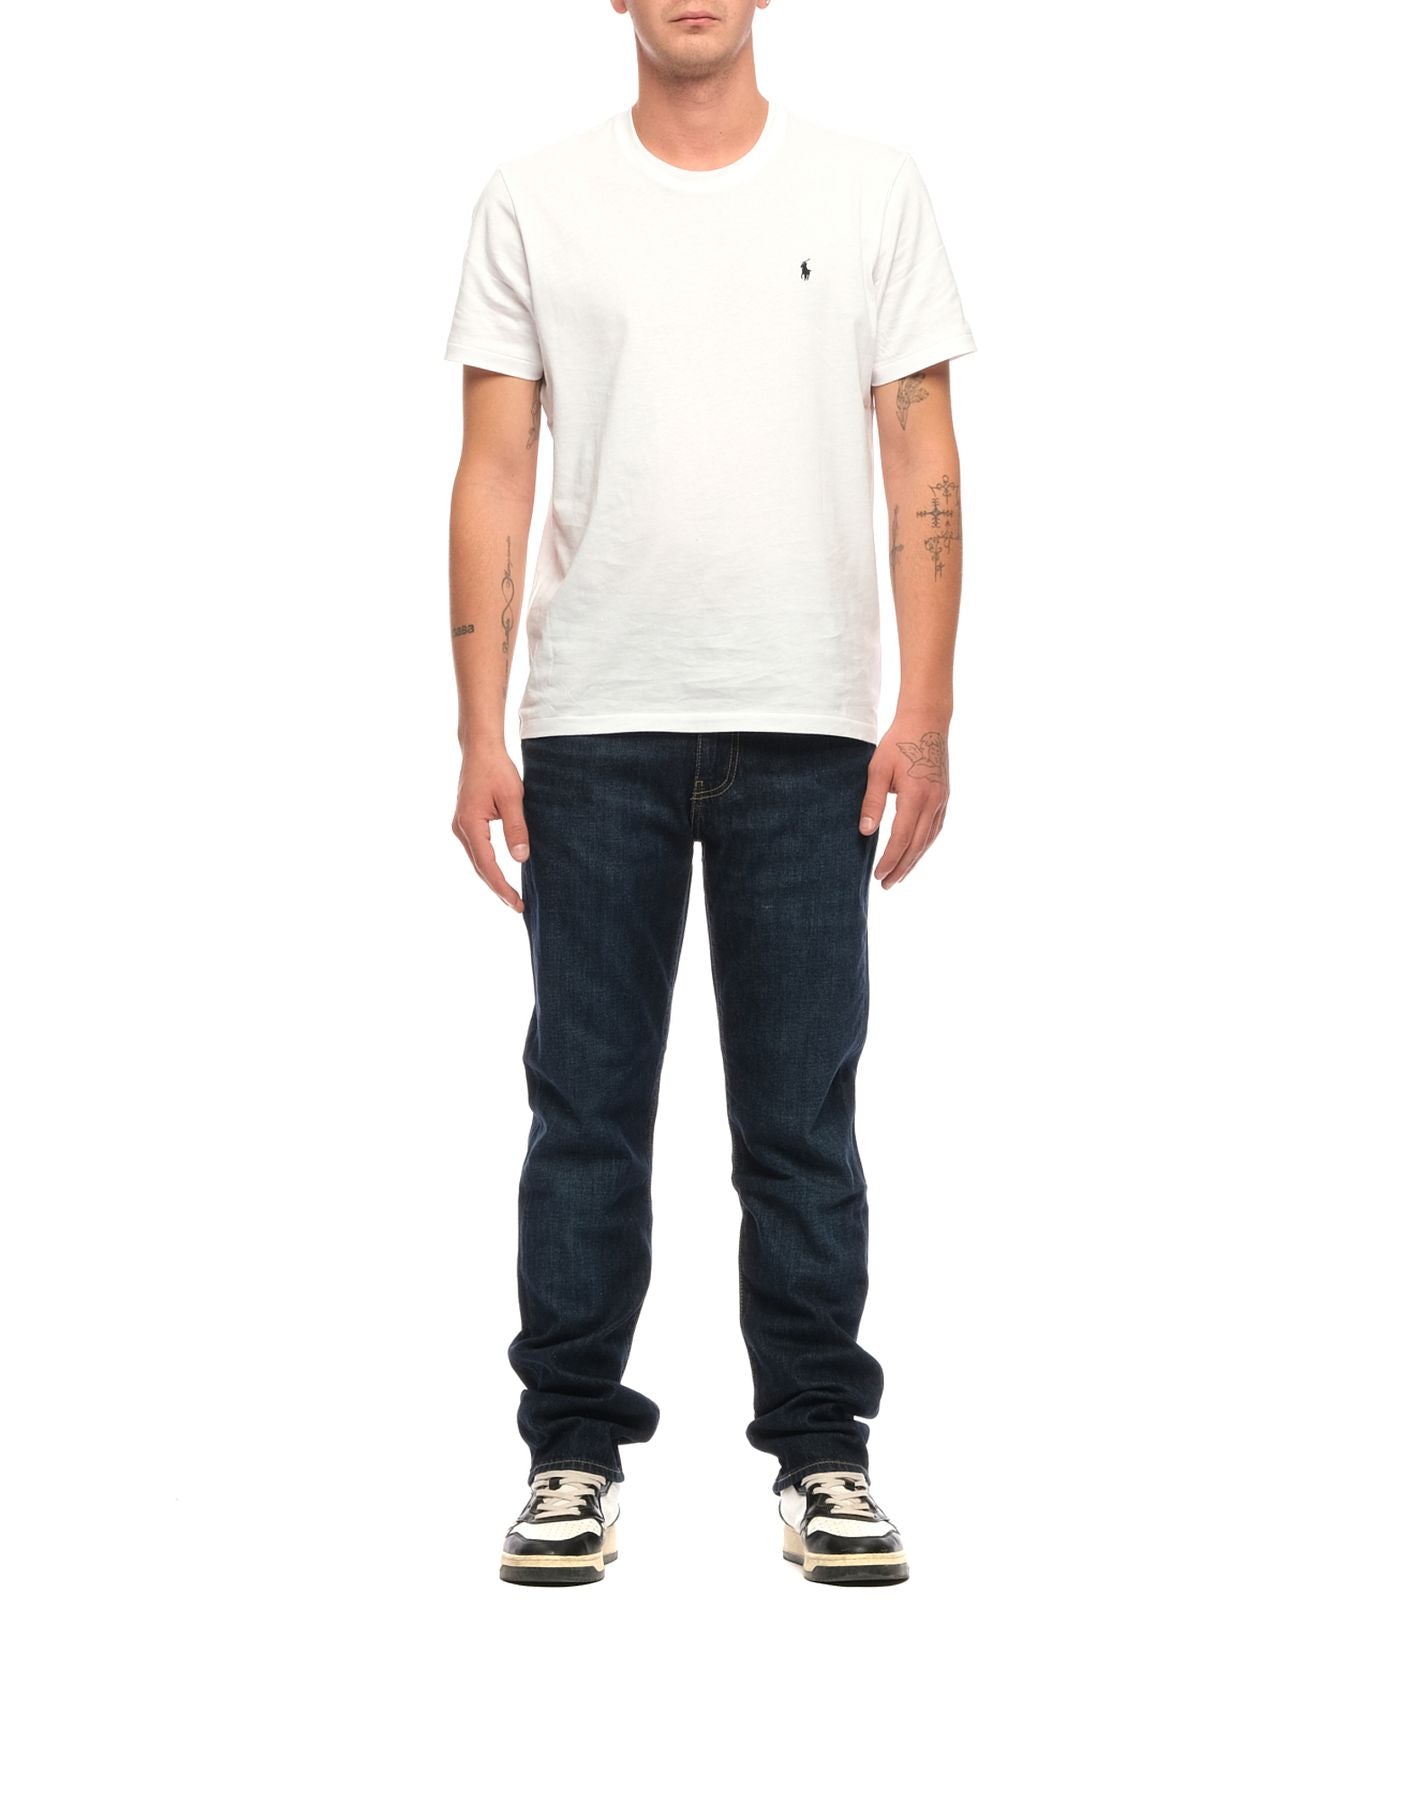 Jeans for man 045115661 KEEPIN IT CLEAN Levi's